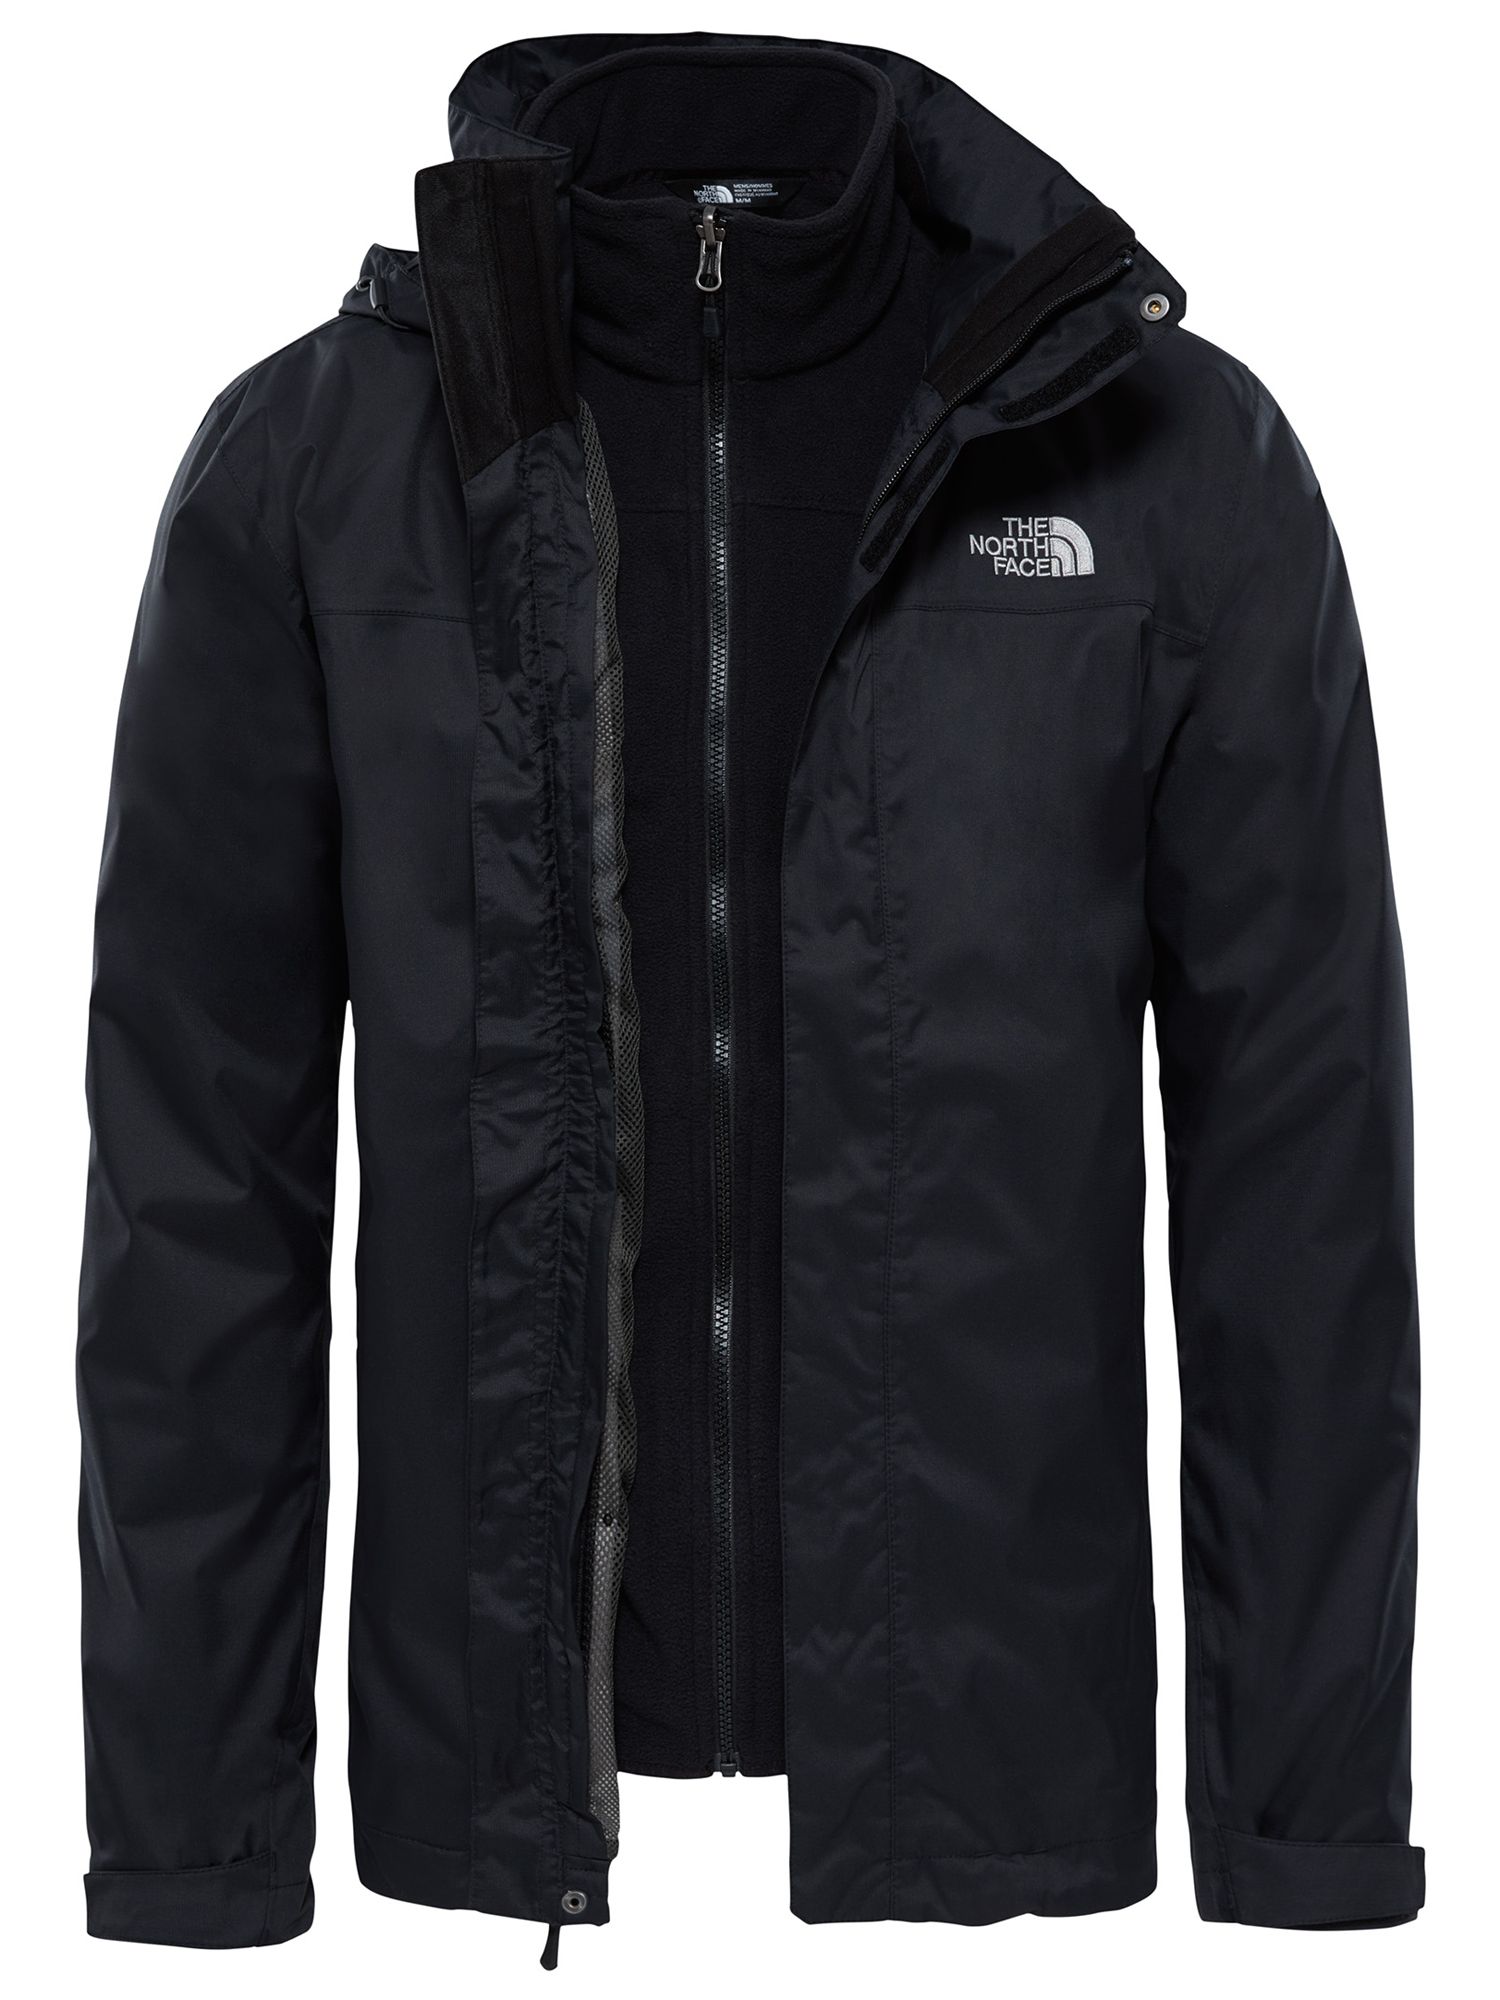 mens north face coat with hood